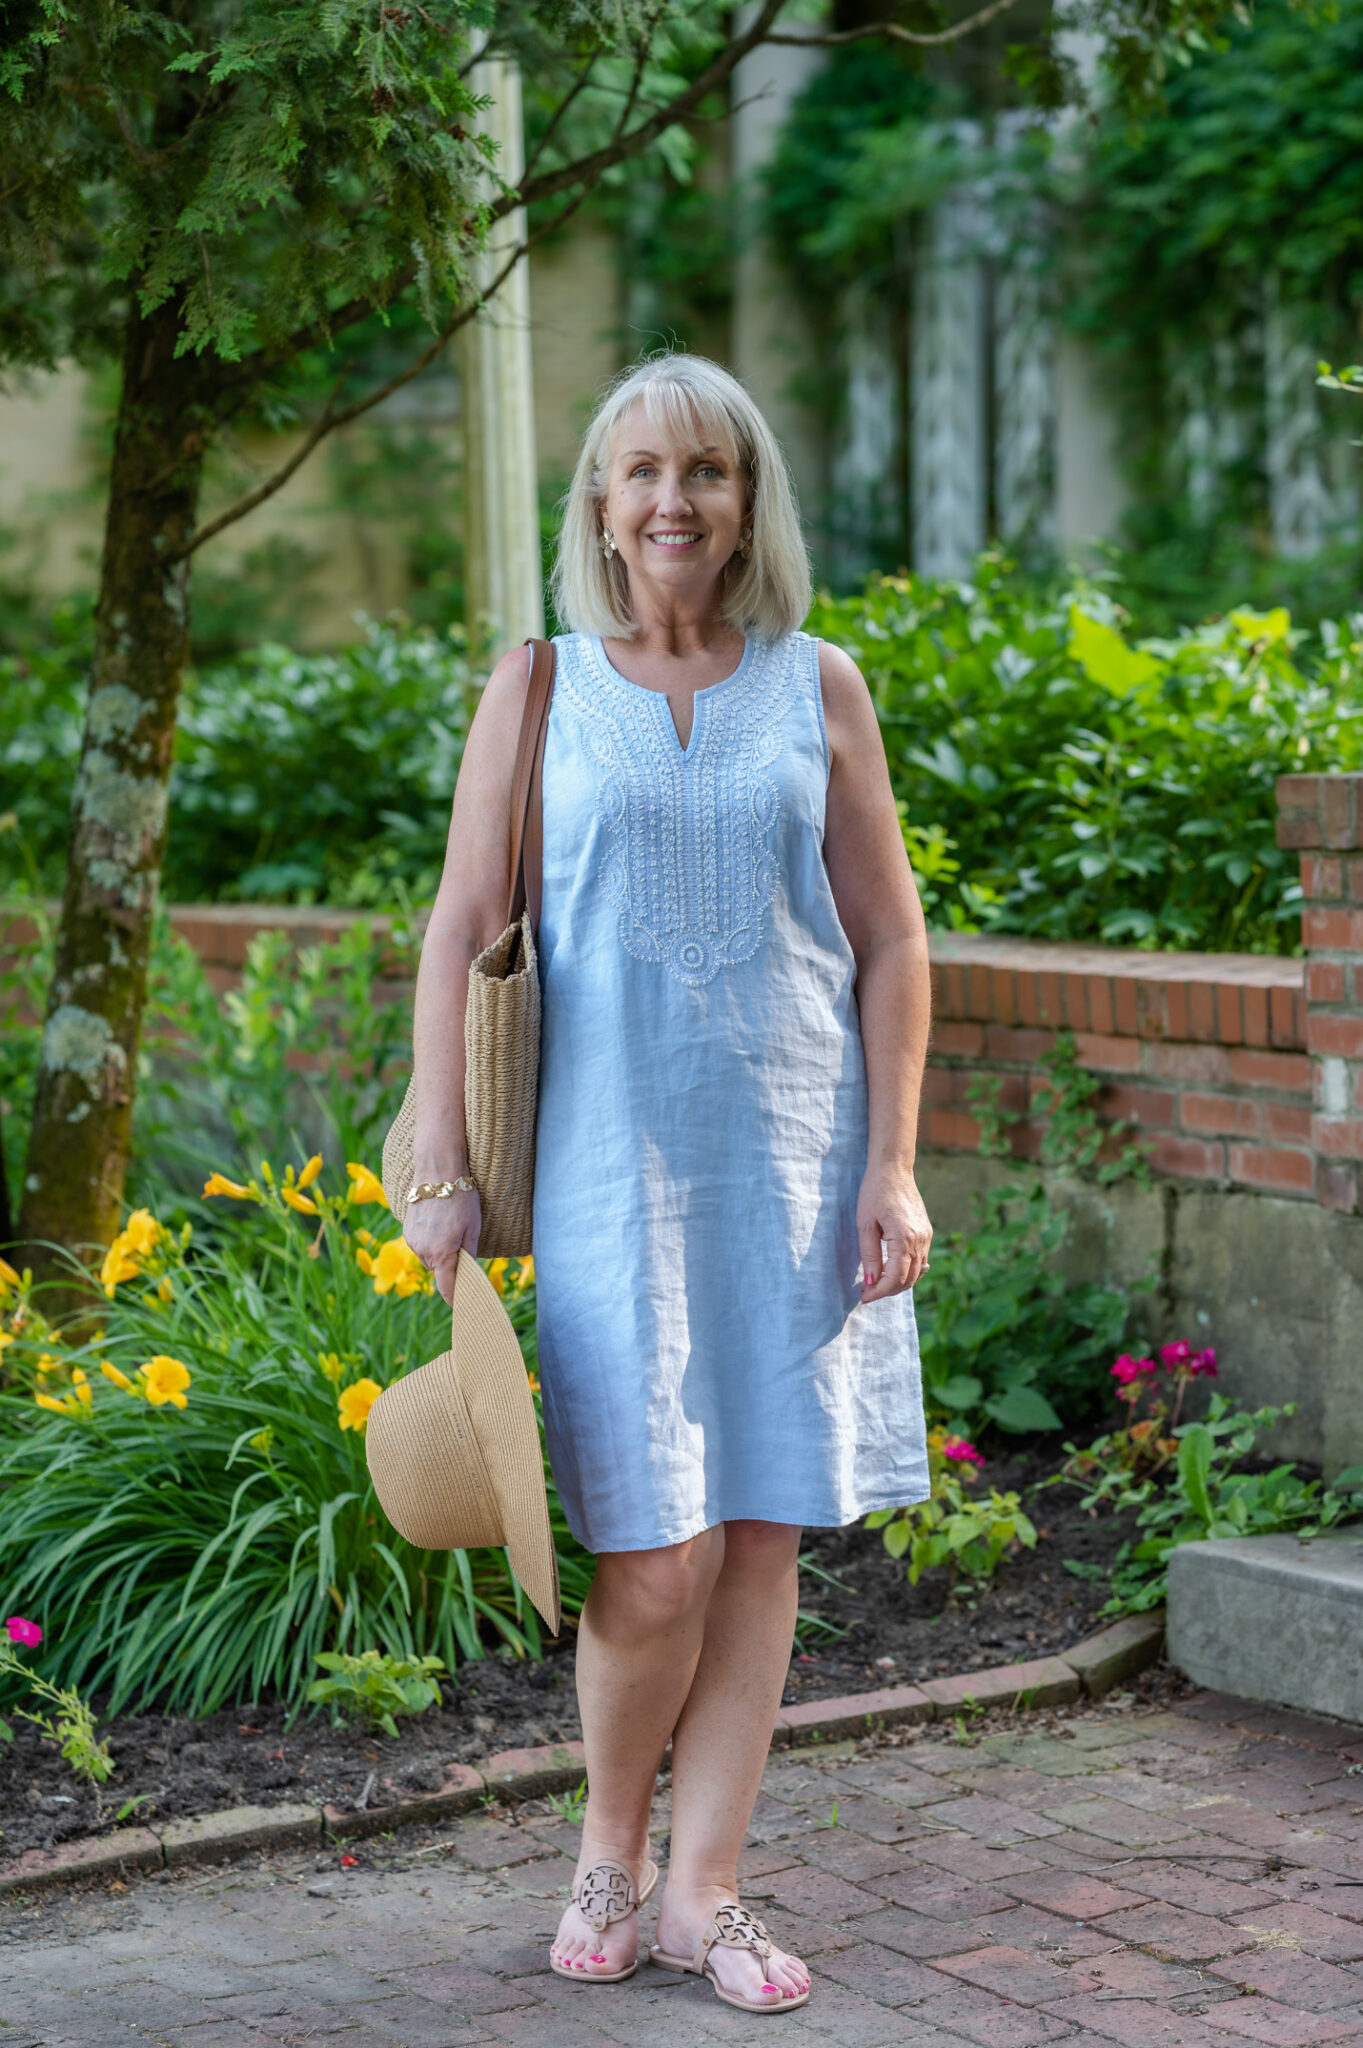 A Pretty Linen Dress for a Hot, Humid Day - Dressed for My Day